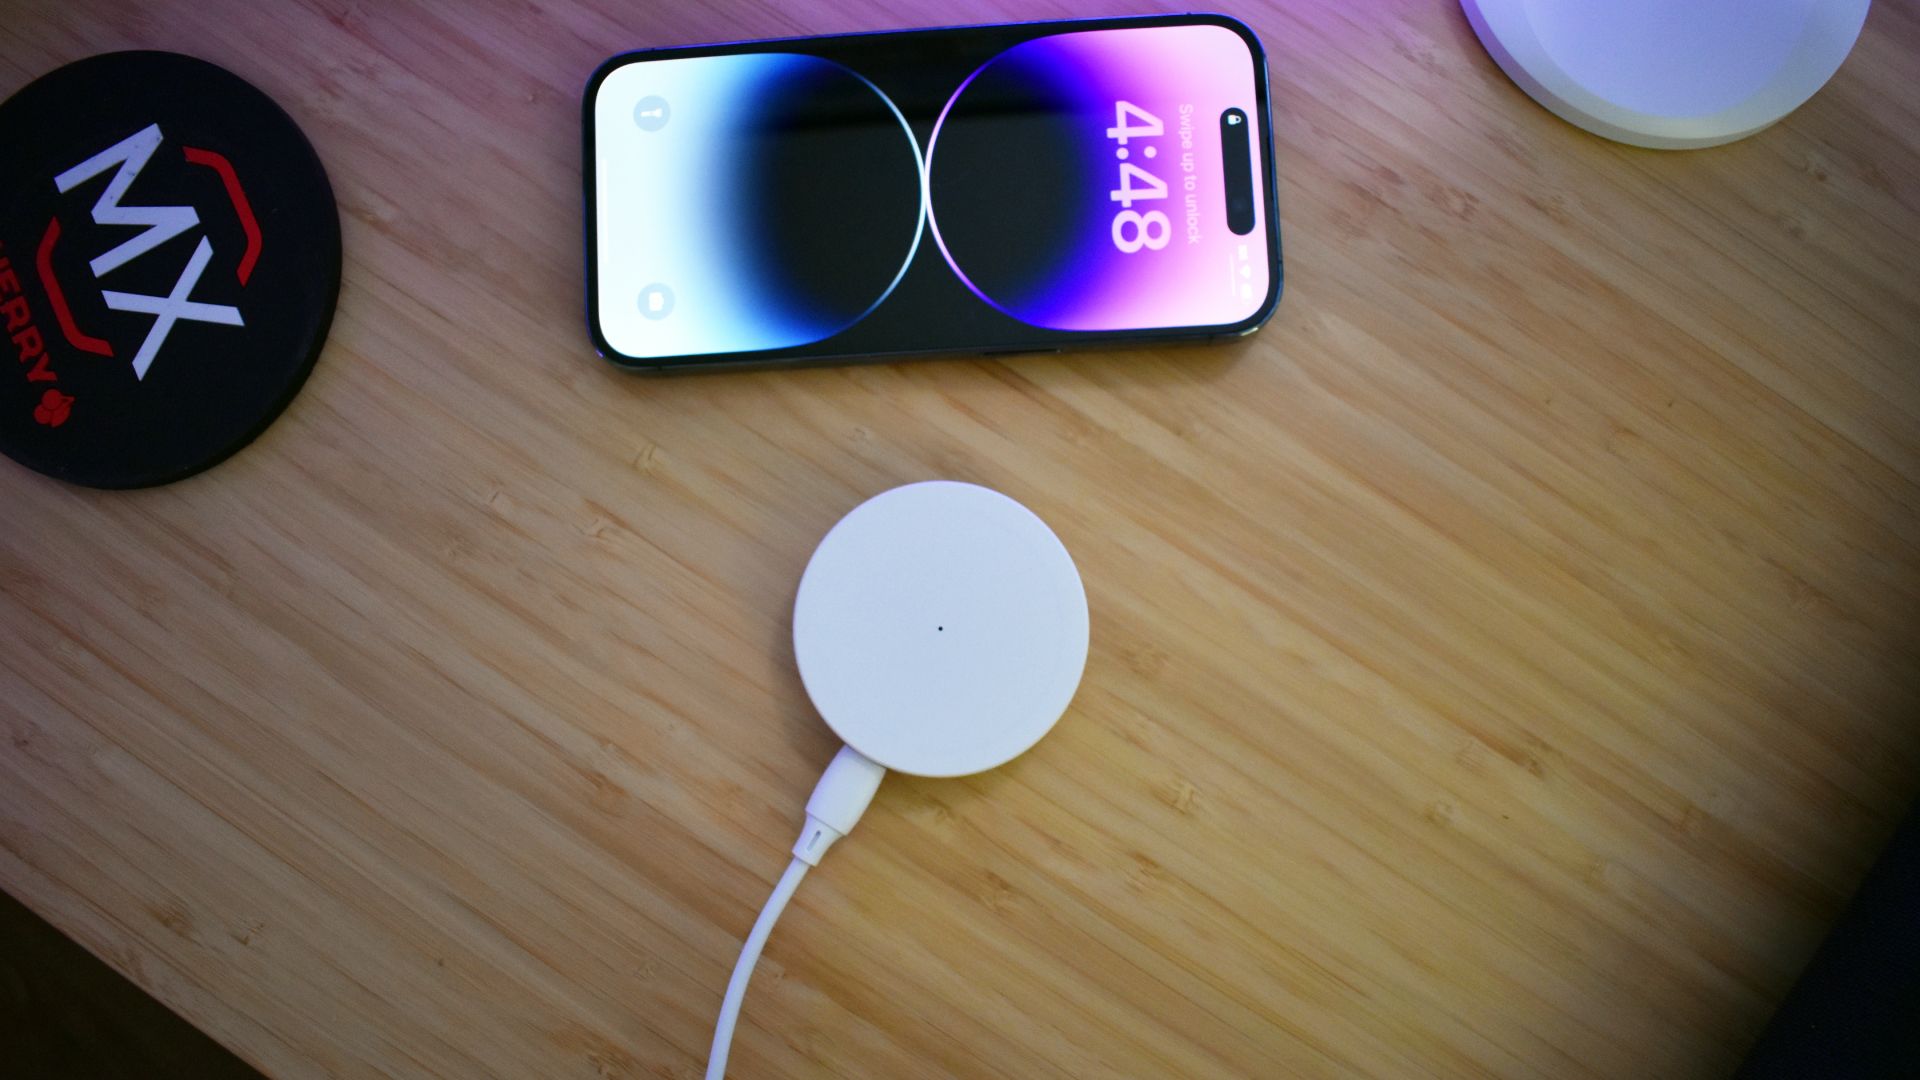 HaloLock Shift Wireless Charger puck on desk next to iPhone 14 Pro and drink coaster